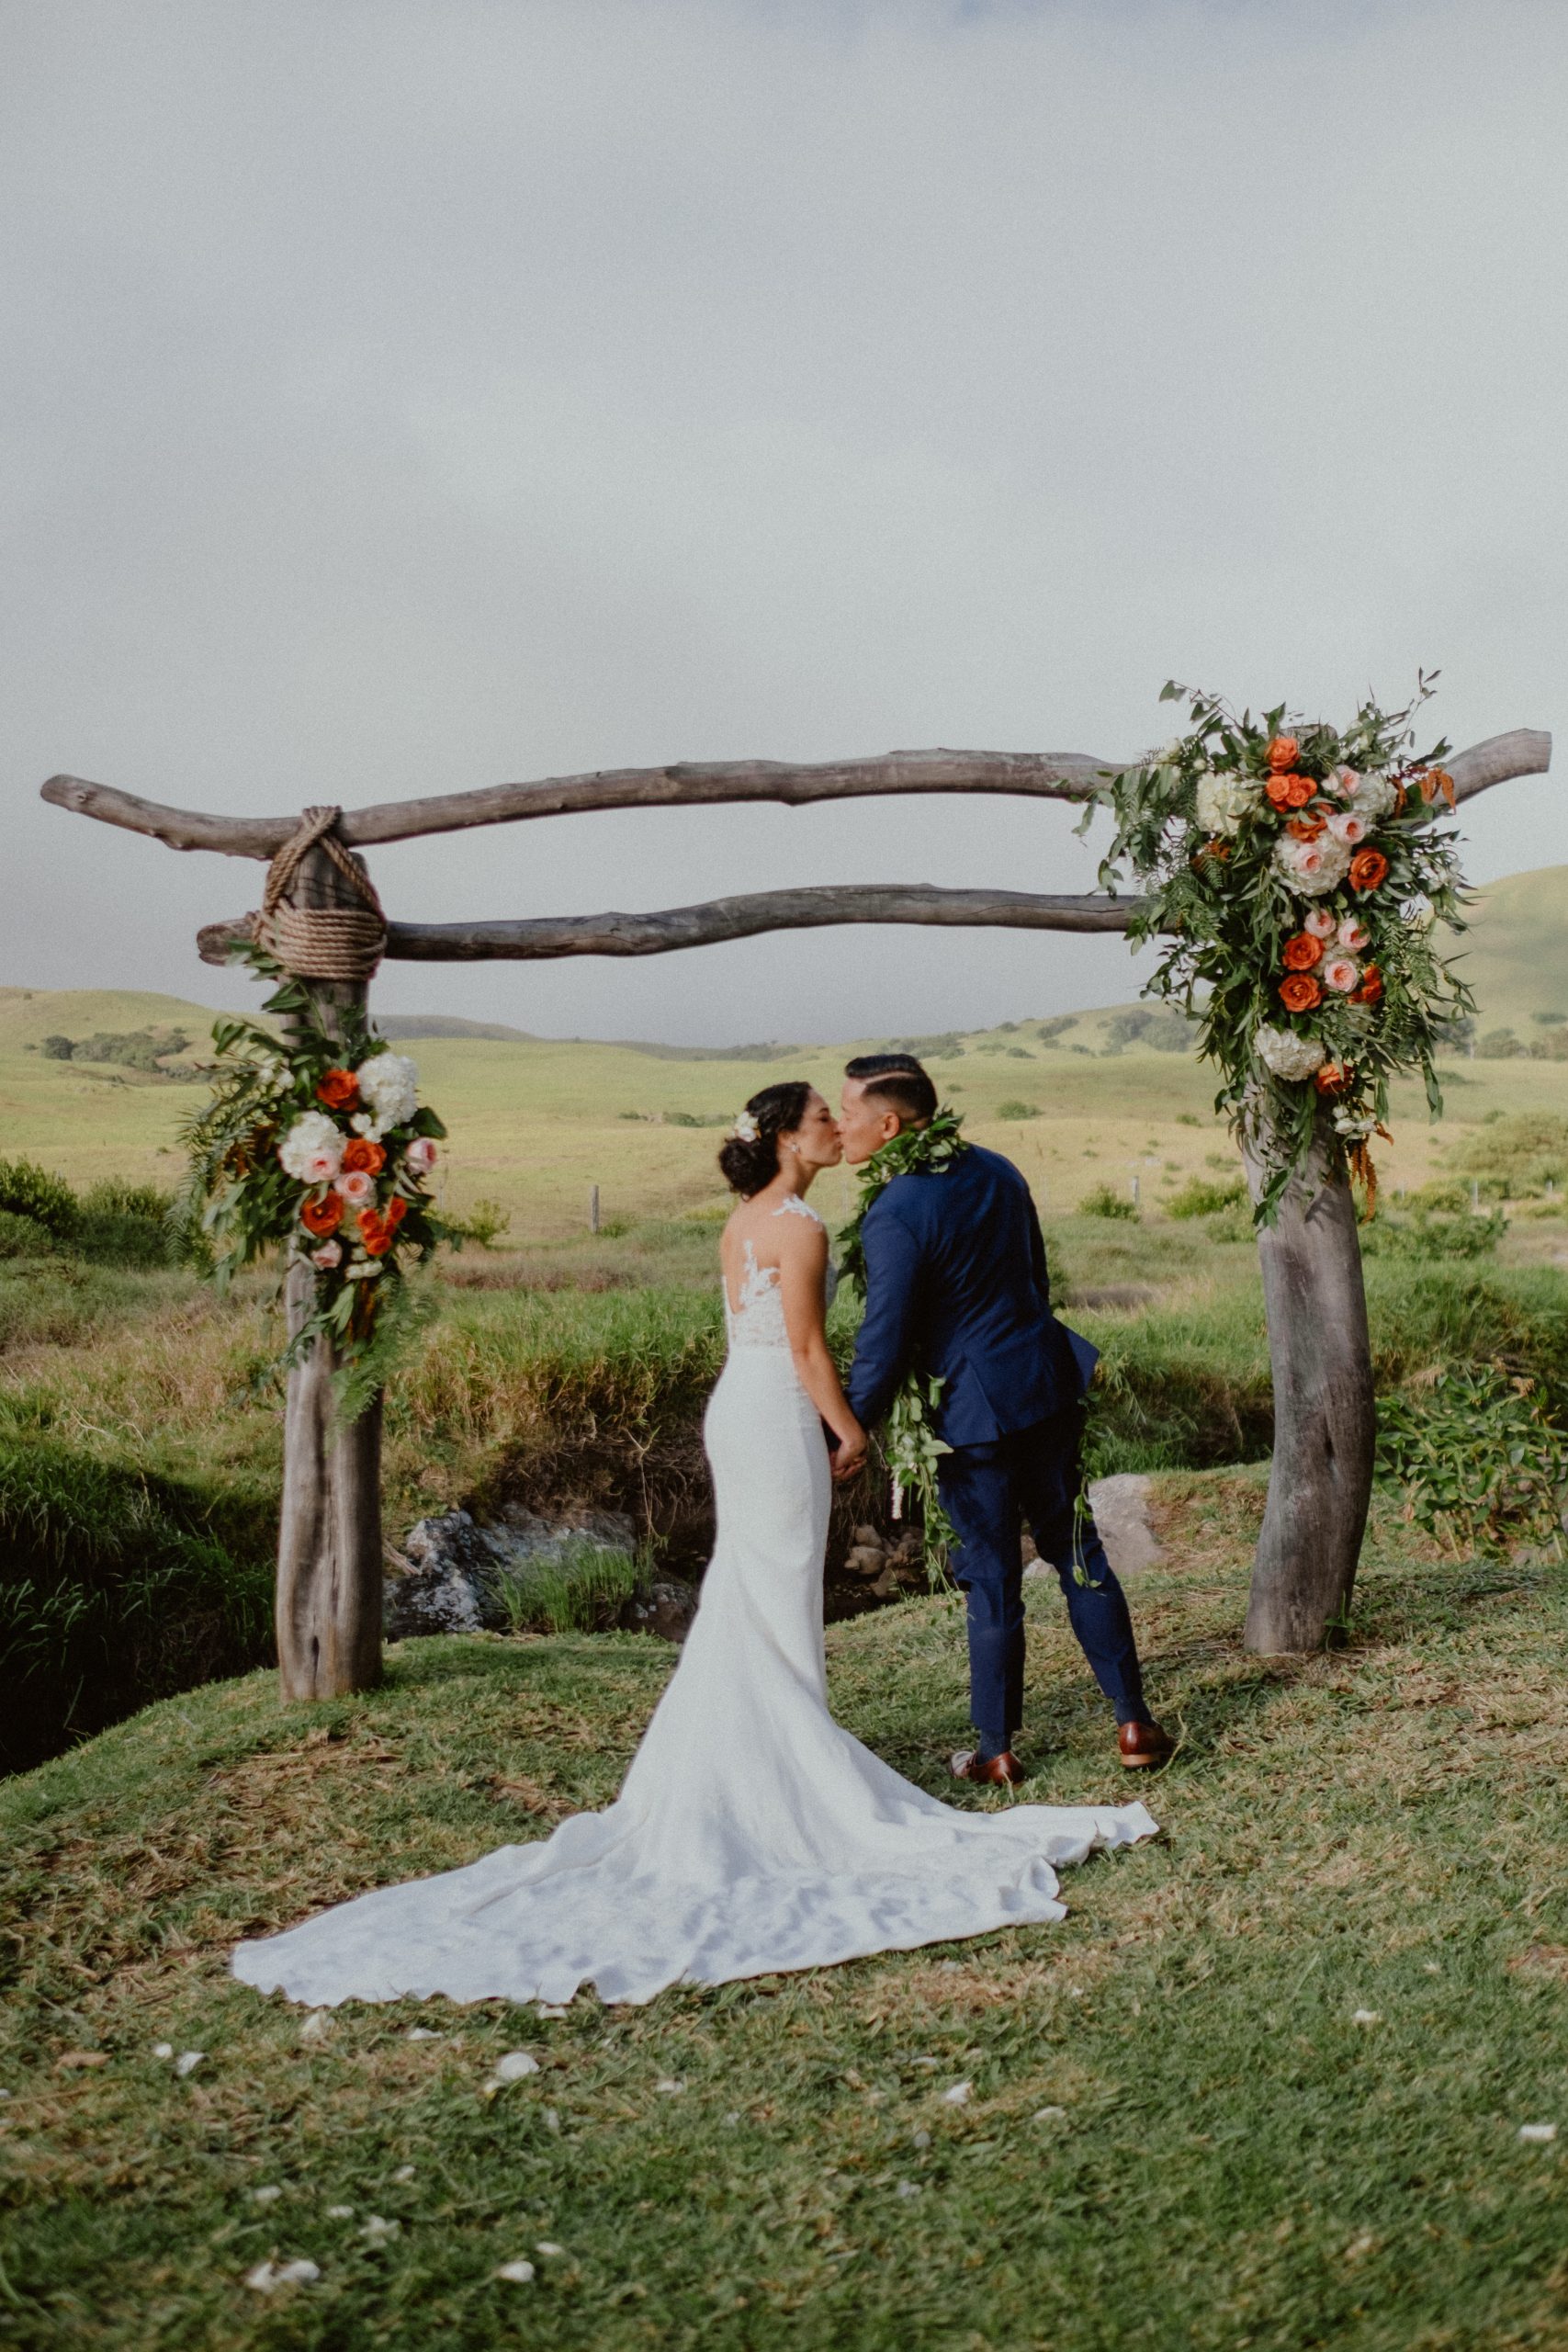 Fall Big Island wedding day photography and Bridal photography with white wedding dress with long train and lace and groom wears a dark blue suit | Big Island Elopement, Hawaii Elopement Photographer, Hawaii Elopement and Wedding Inspiration, Hawaii Elopement ideas, Big Island Wedding Inspiration, Fall Hawaiian Wedding Ideas, Fall Wedding Inspiration, Hawaii Outdoor Wedding Ideas | chelseaabril.com